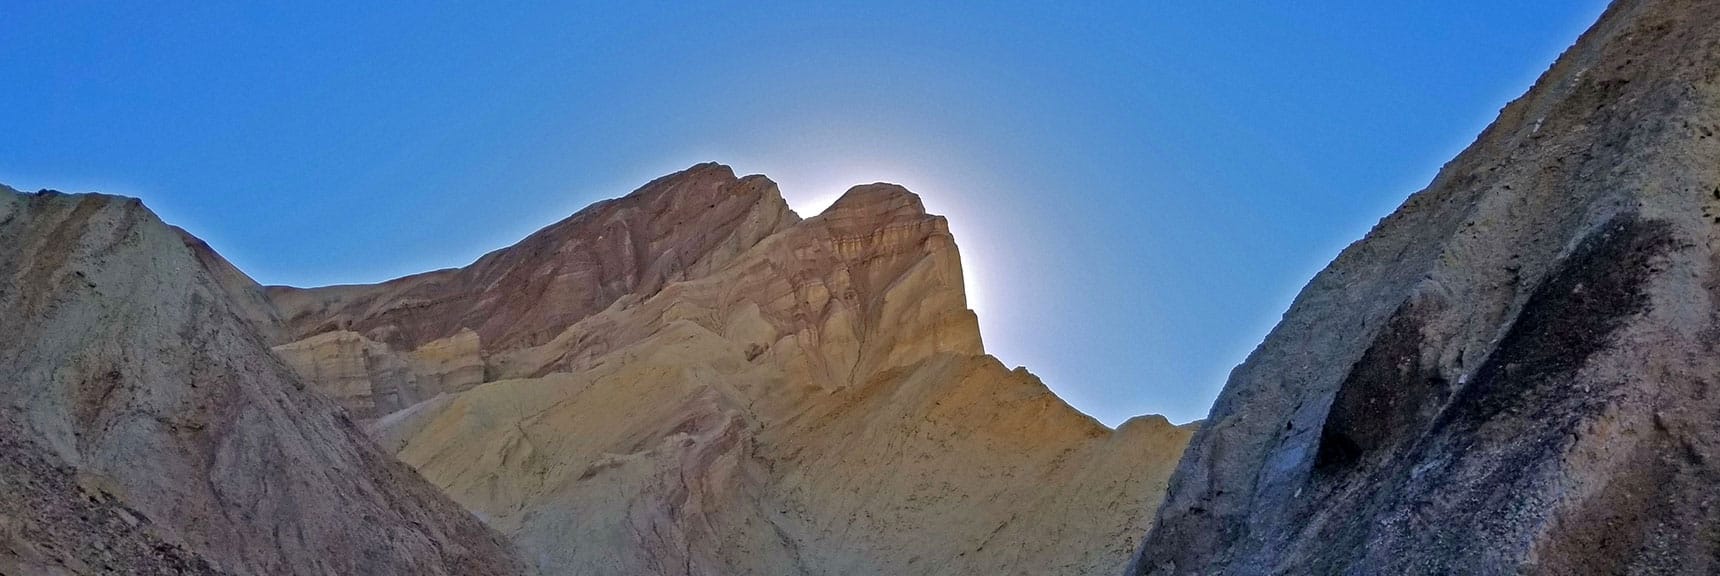 First Sight of Manly Beacon from Red Cathedral Junction. | Golden Canyon to Zabriskie Point | Death Valley National Park, California